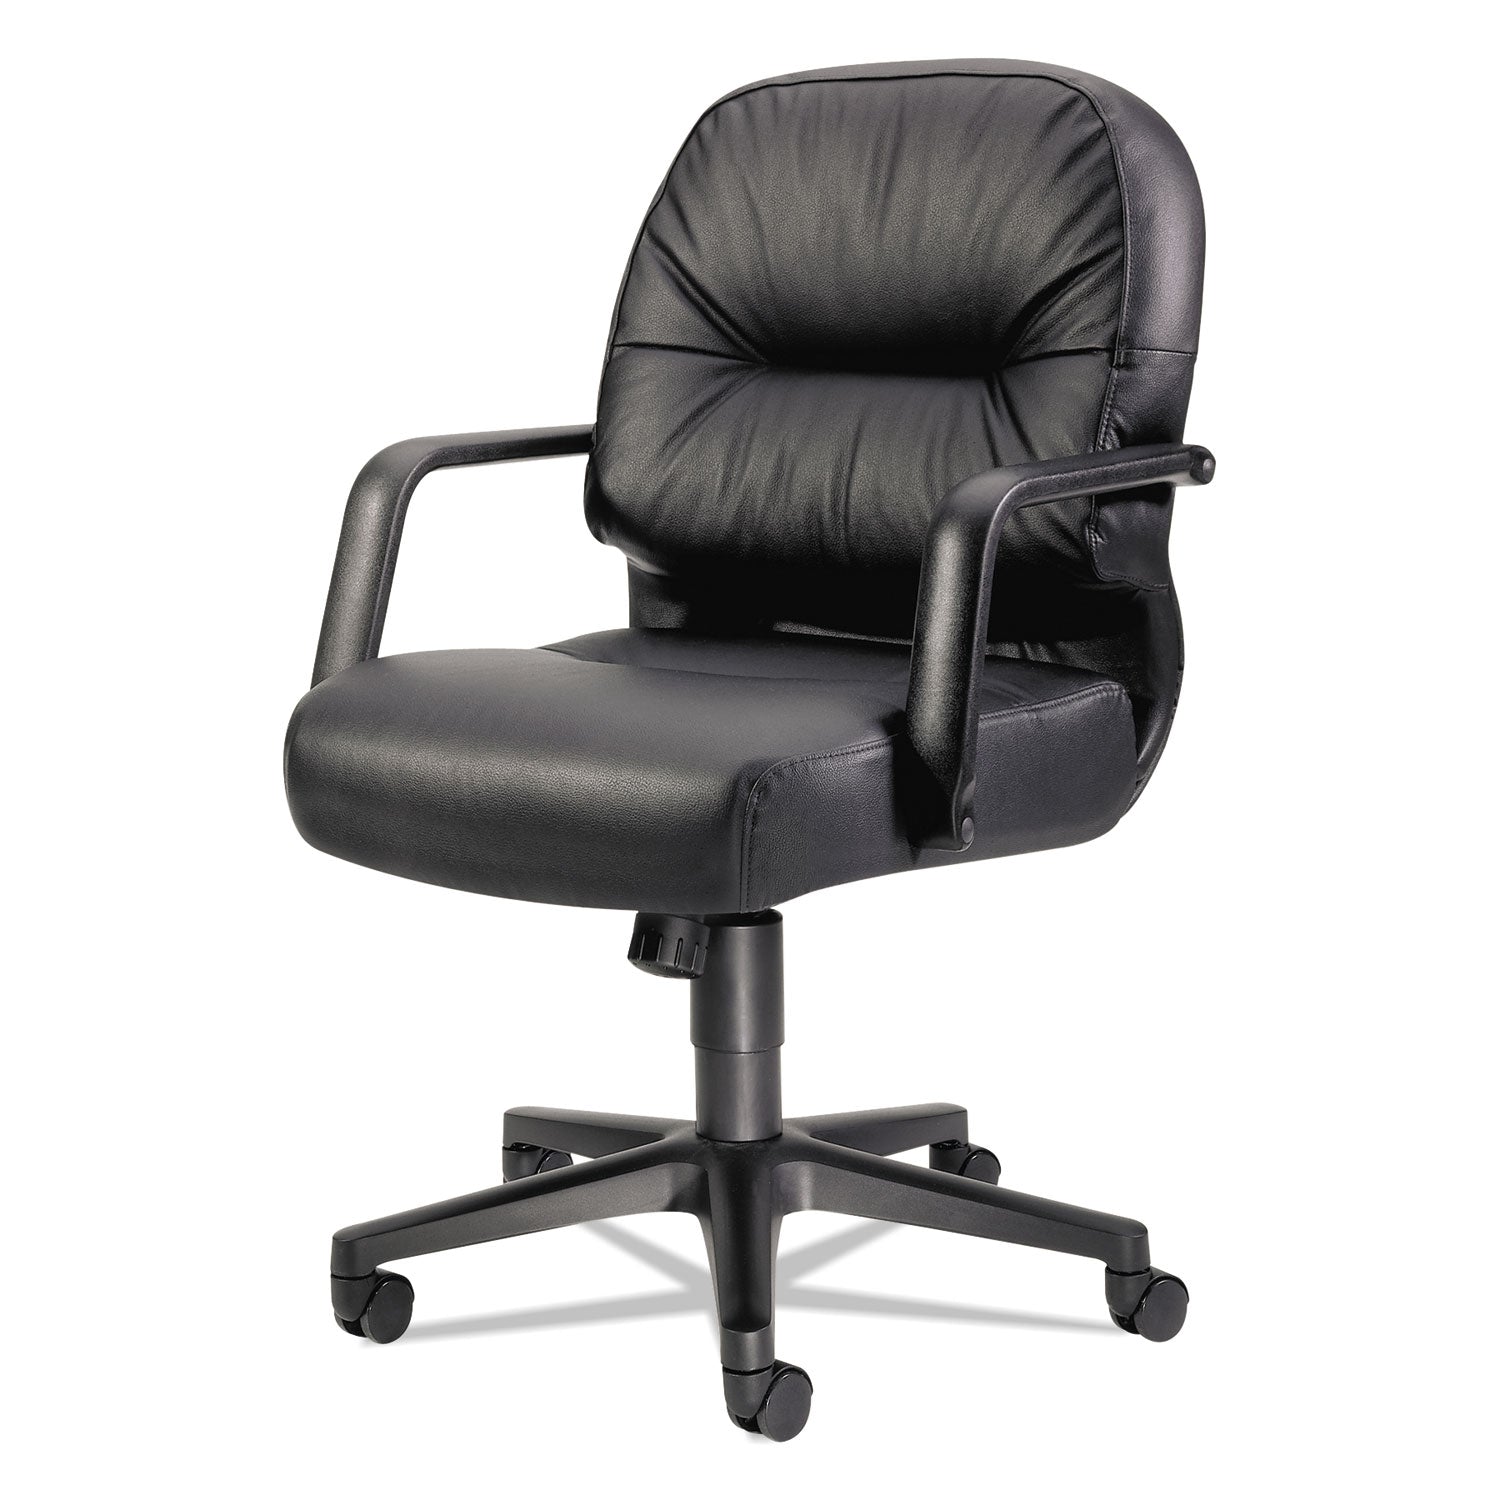 Pillow-Soft 2090 Series Leather Managerial Mid-Back Swivel/Tilt Chair, Supports 300 lb, 16.75" to 21.25" Seat Height, Black - 